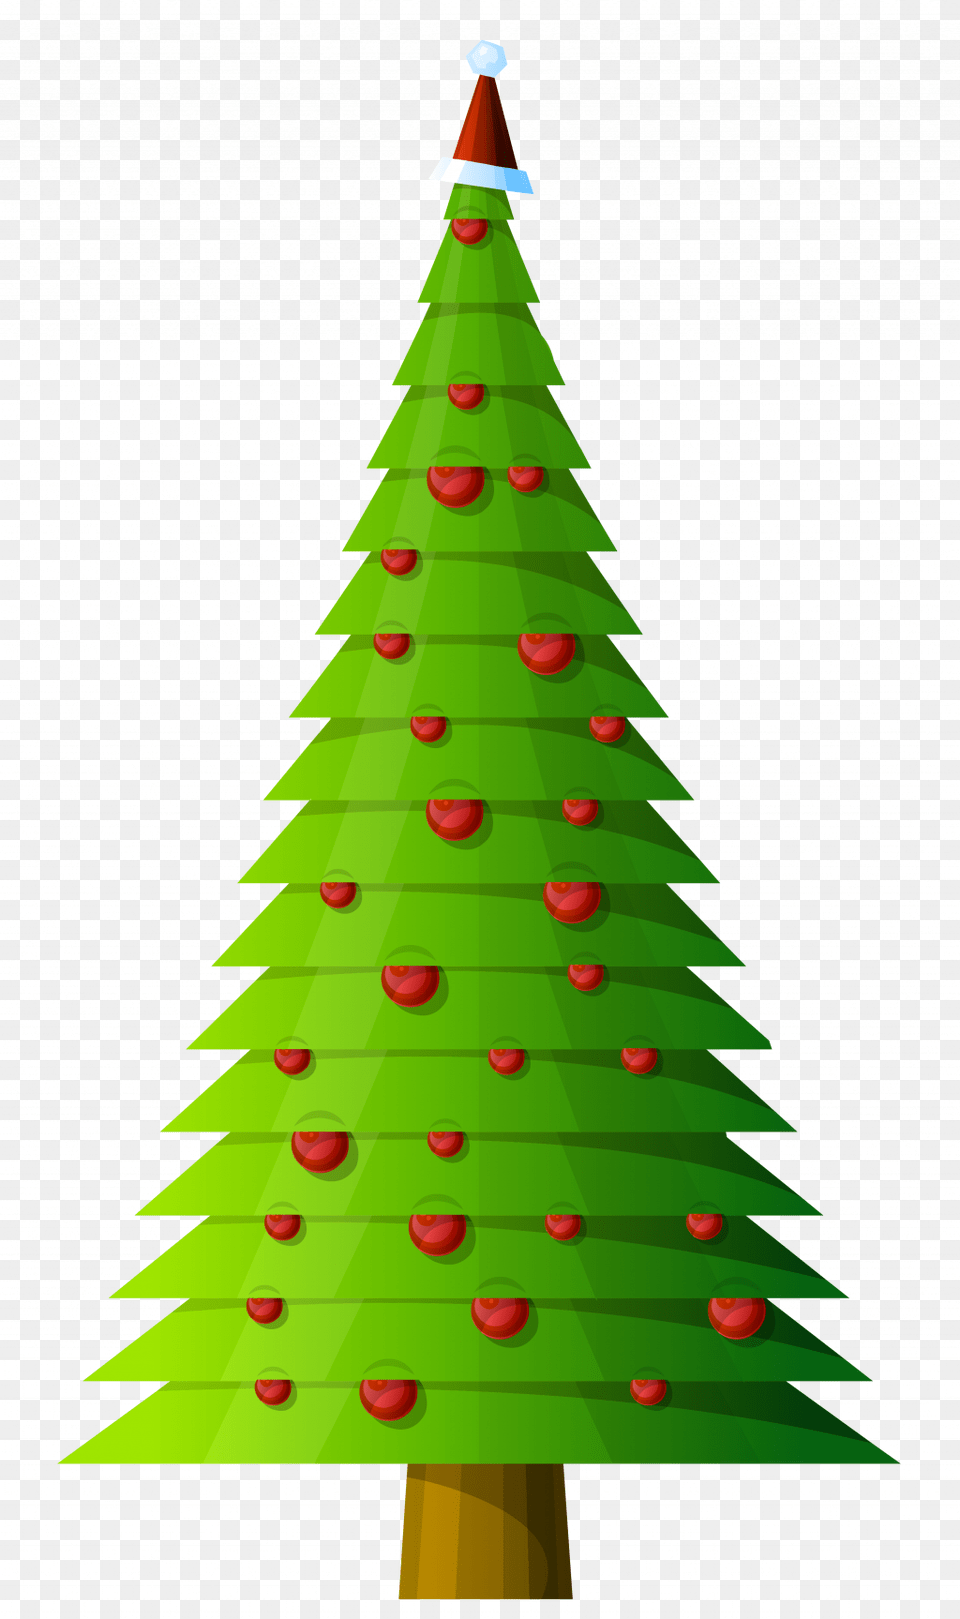 Christmas Tree Clipart Top Border Christmas Tree Graphic, Plant, Christmas Decorations, Festival, Rocket Free Png